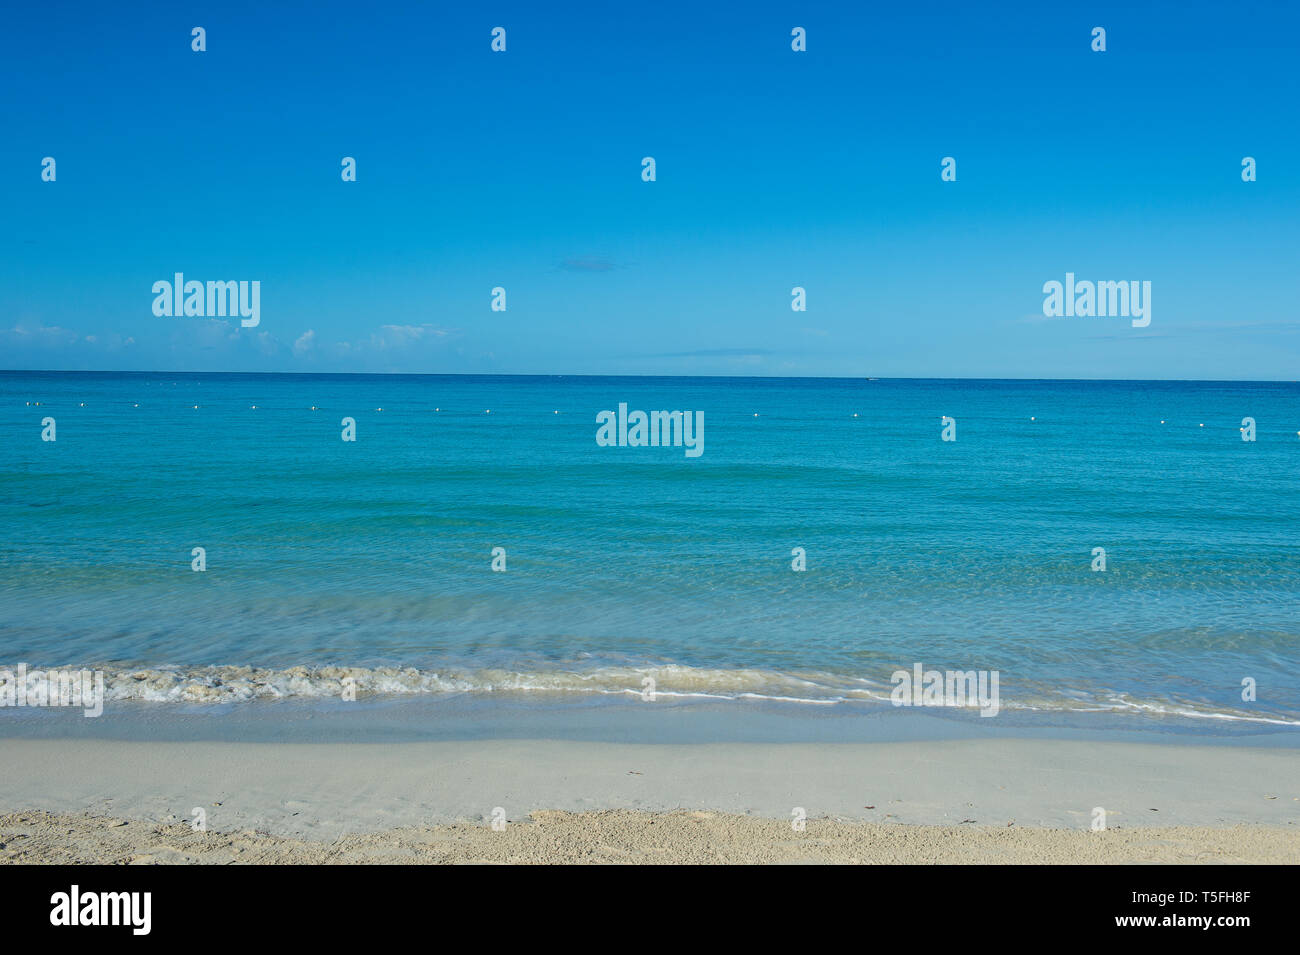 Jamaica, Montego bay, Turquoise water on a sandy beach Stock Photo